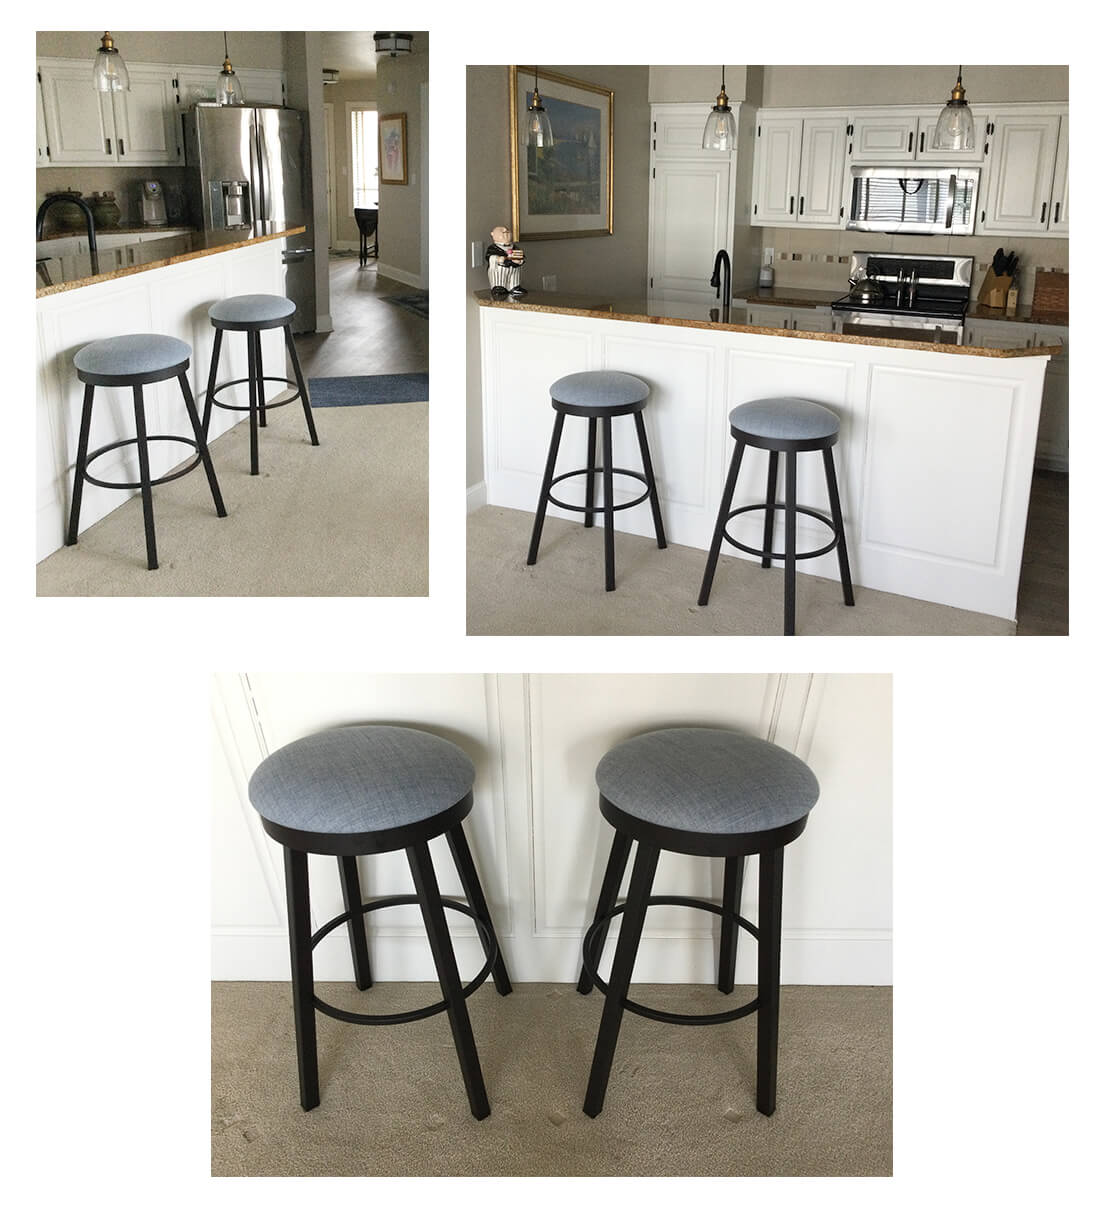 Amisco's Connor Backless Swivel Bar Stool in Dark Brown Metal and Blue Seat Cushion in Transitional Kitchen